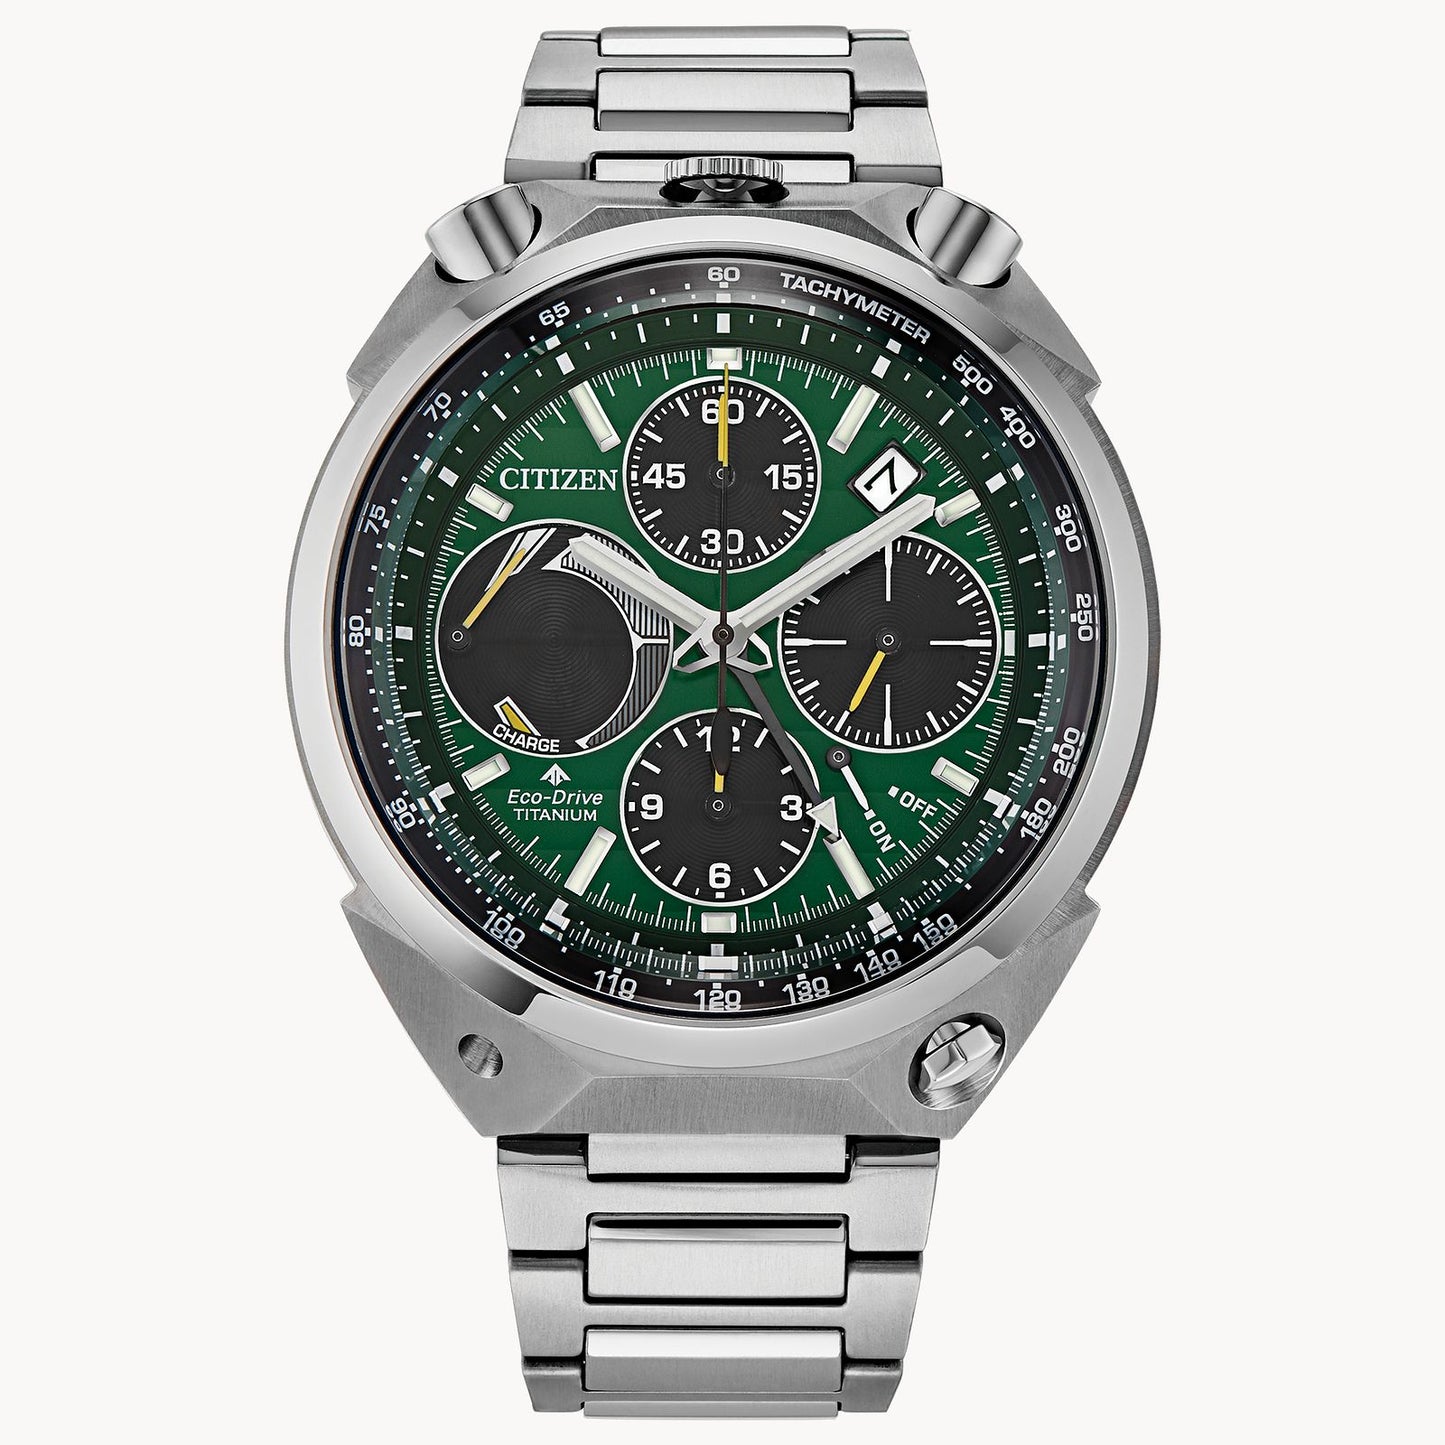 Load image into Gallery viewer, Promaster Tsuno Chrono Racer Watch
